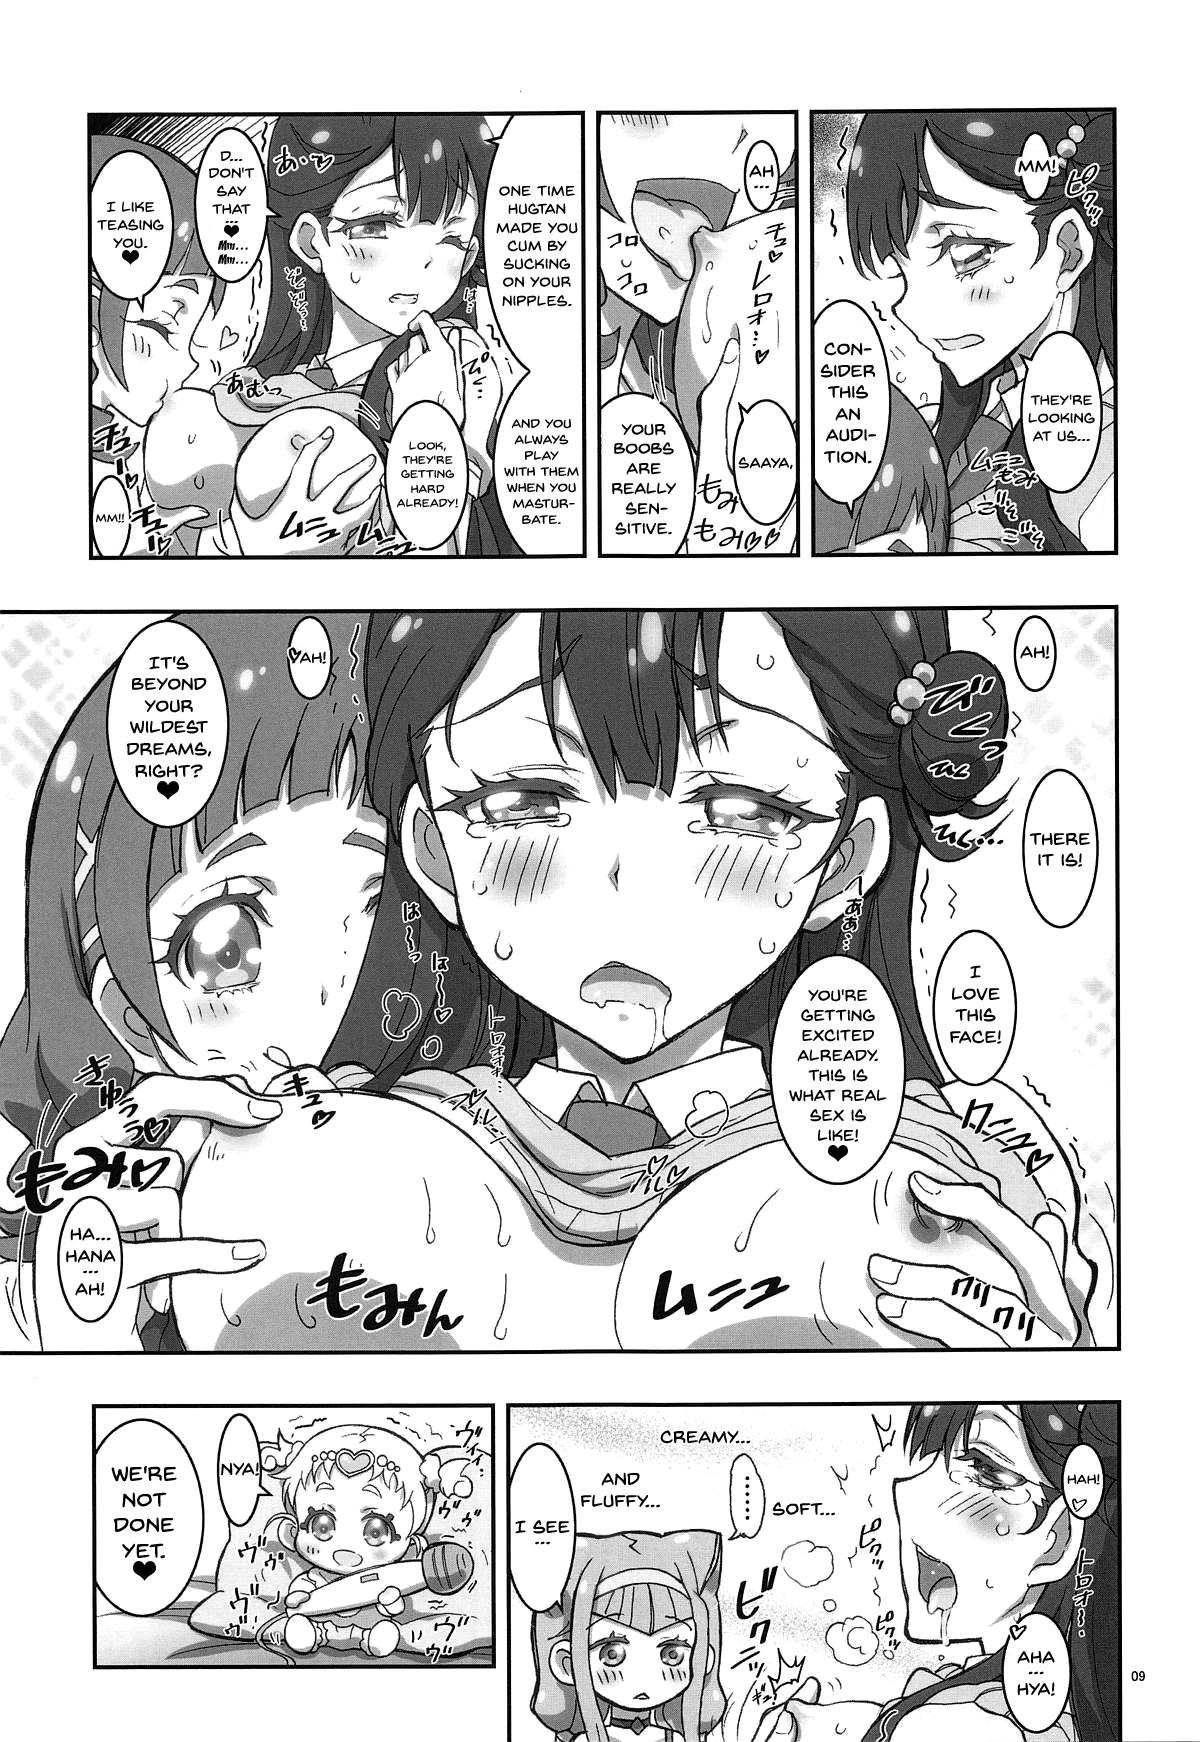 Pussy Fingering LOVE LOVE HUG HUG ANDROID - Hugtto precure Hot Mom - Page 8